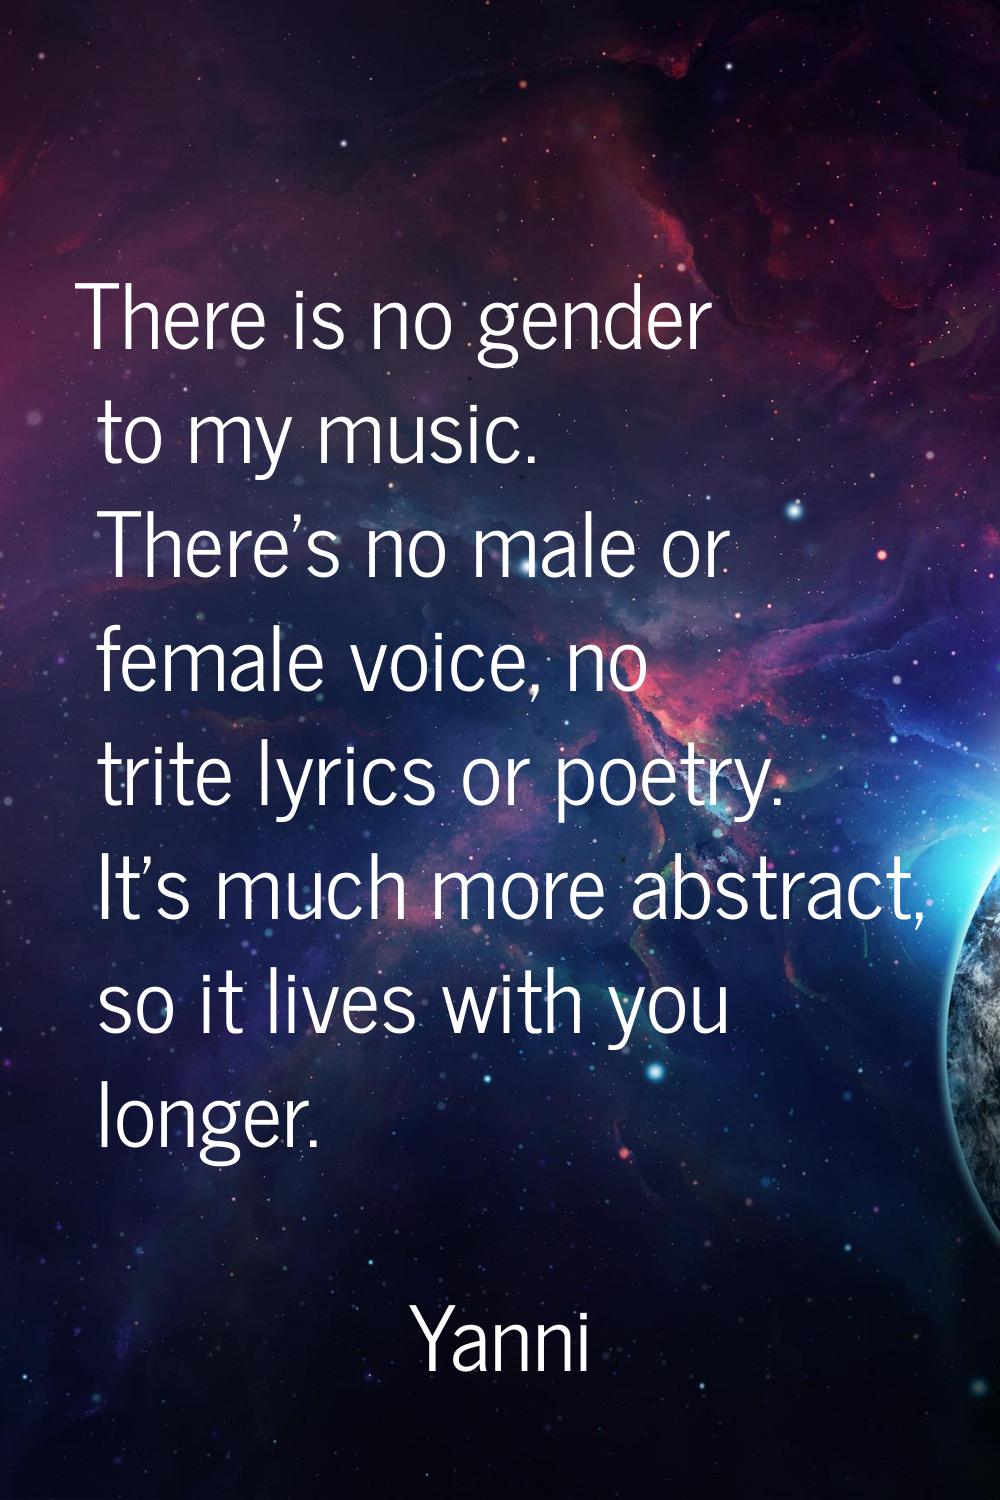 There is no gender to my music. There's no male or female voice, no trite lyrics or poetry. It's mu